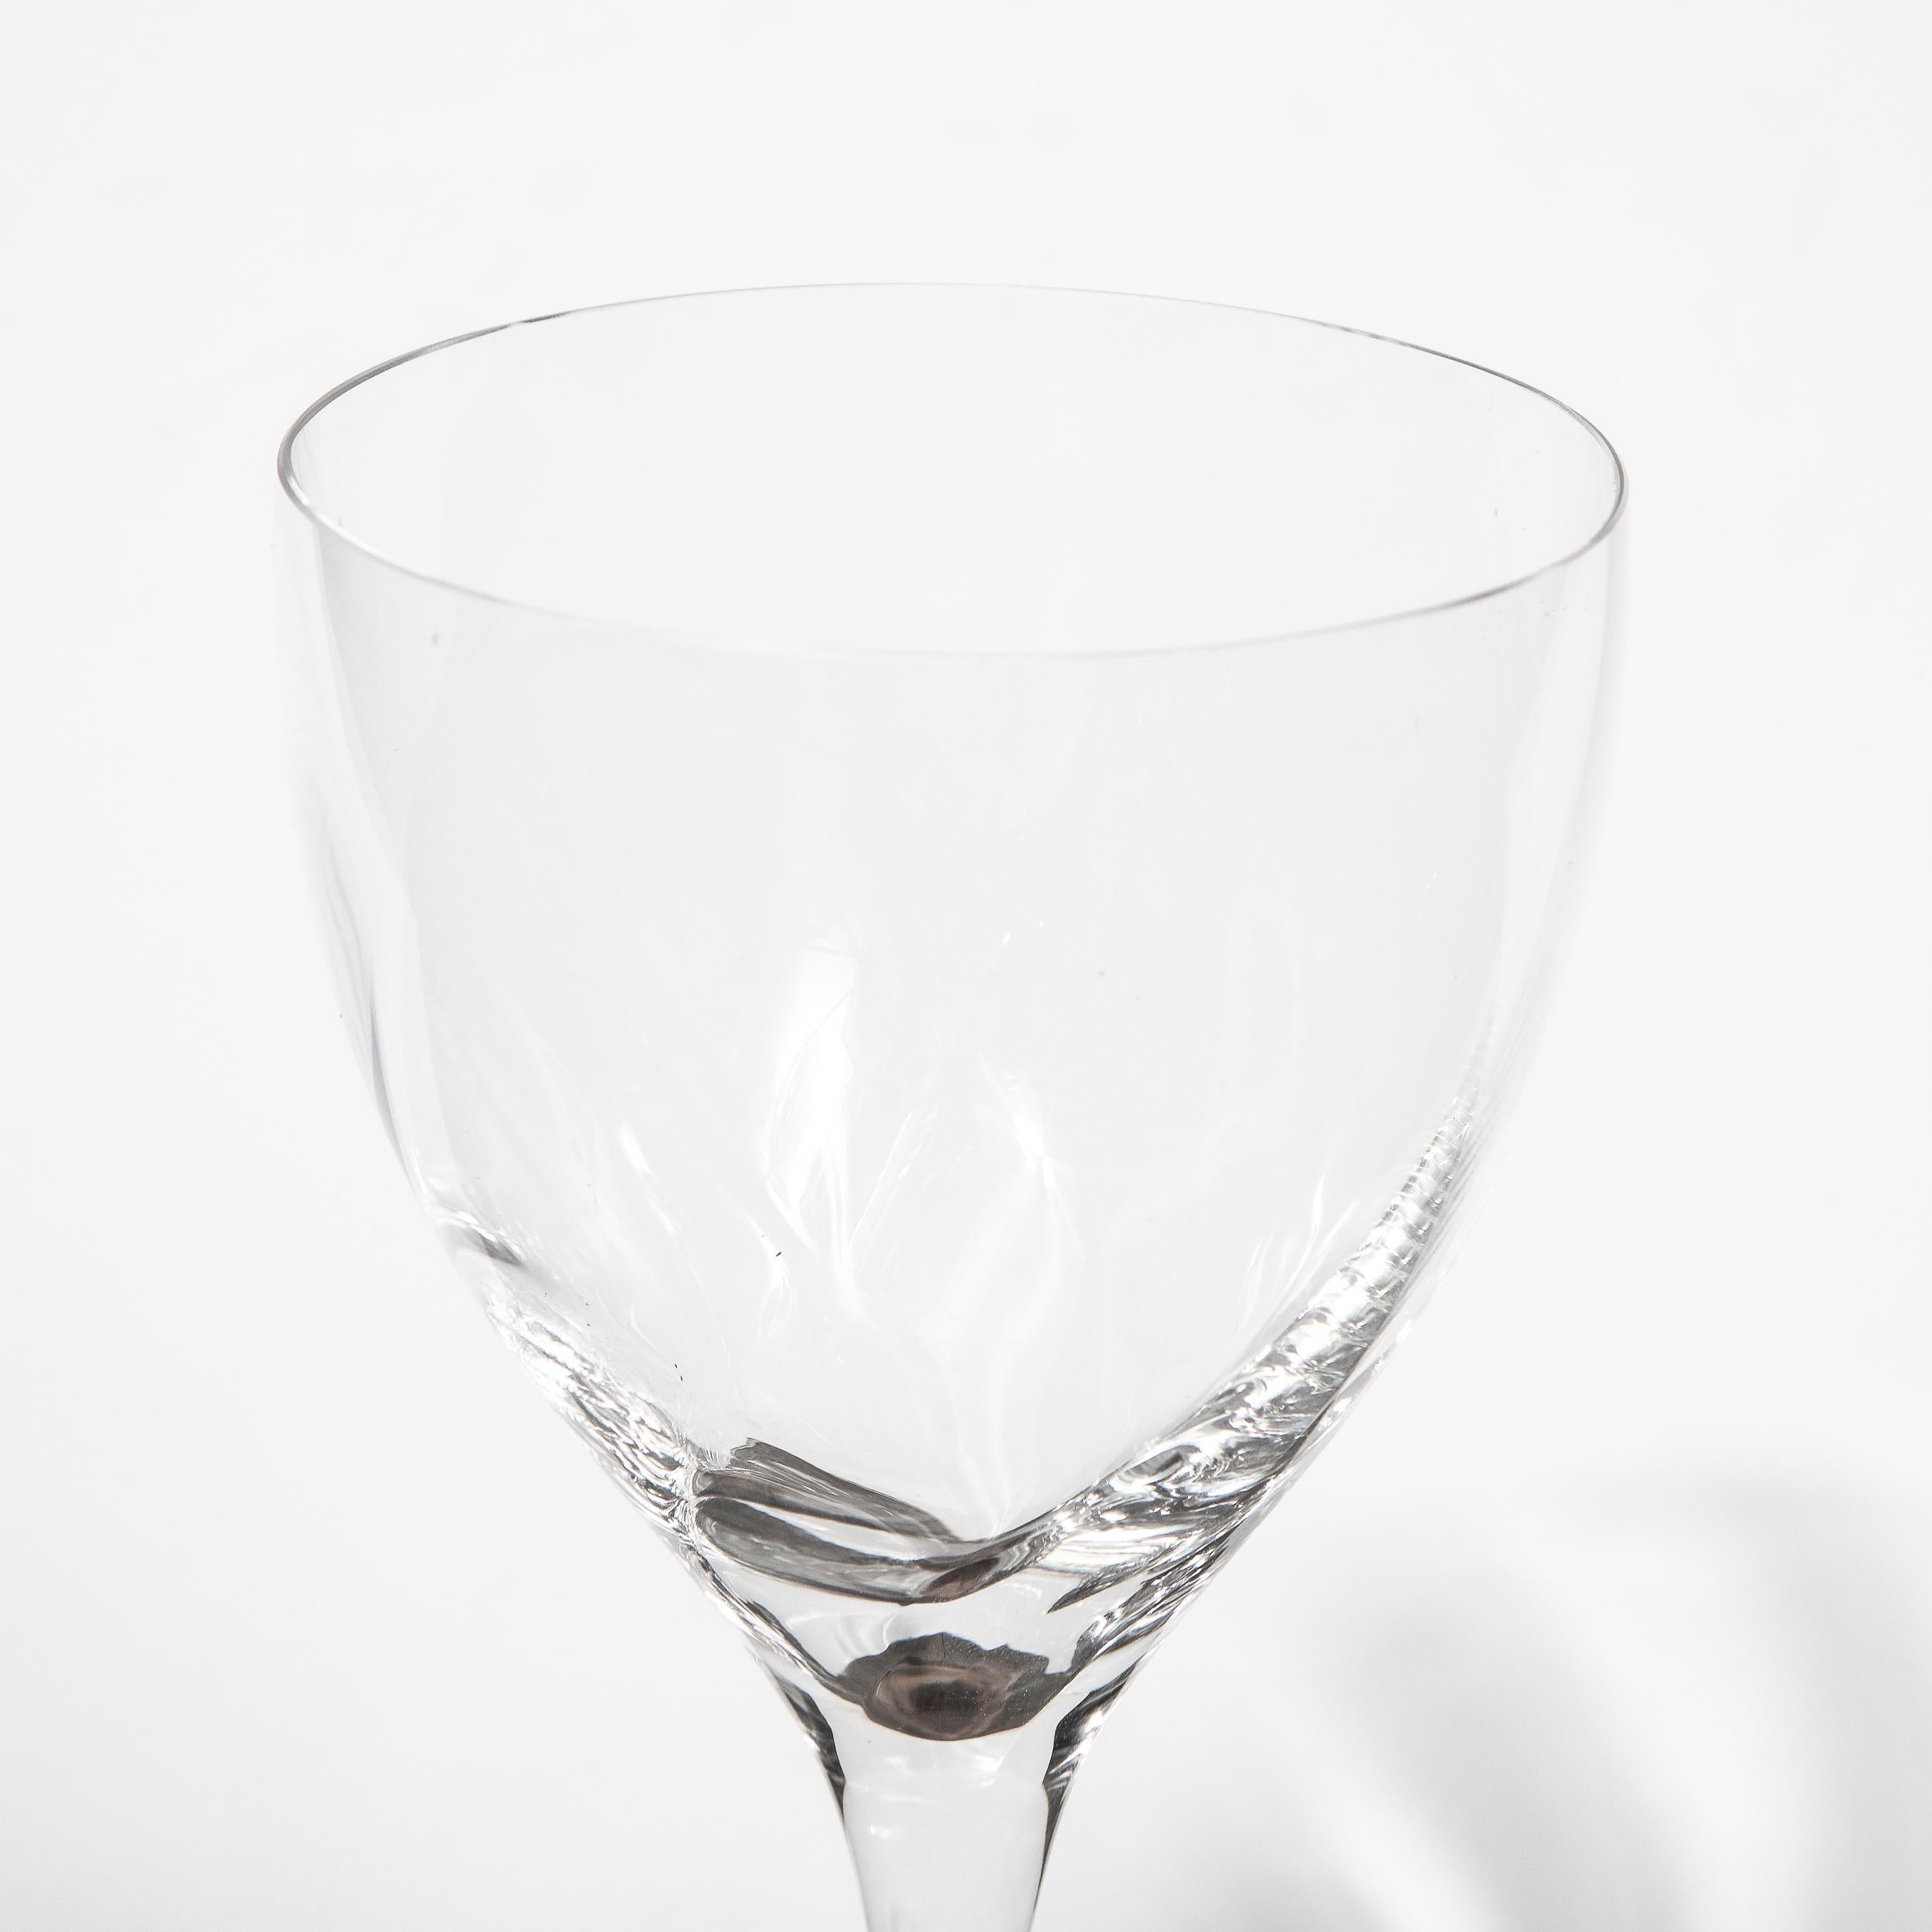 American Set of Twelve Textured Translucent Crystal Wine/ Water Glasses by Tiffany & Co. For Sale